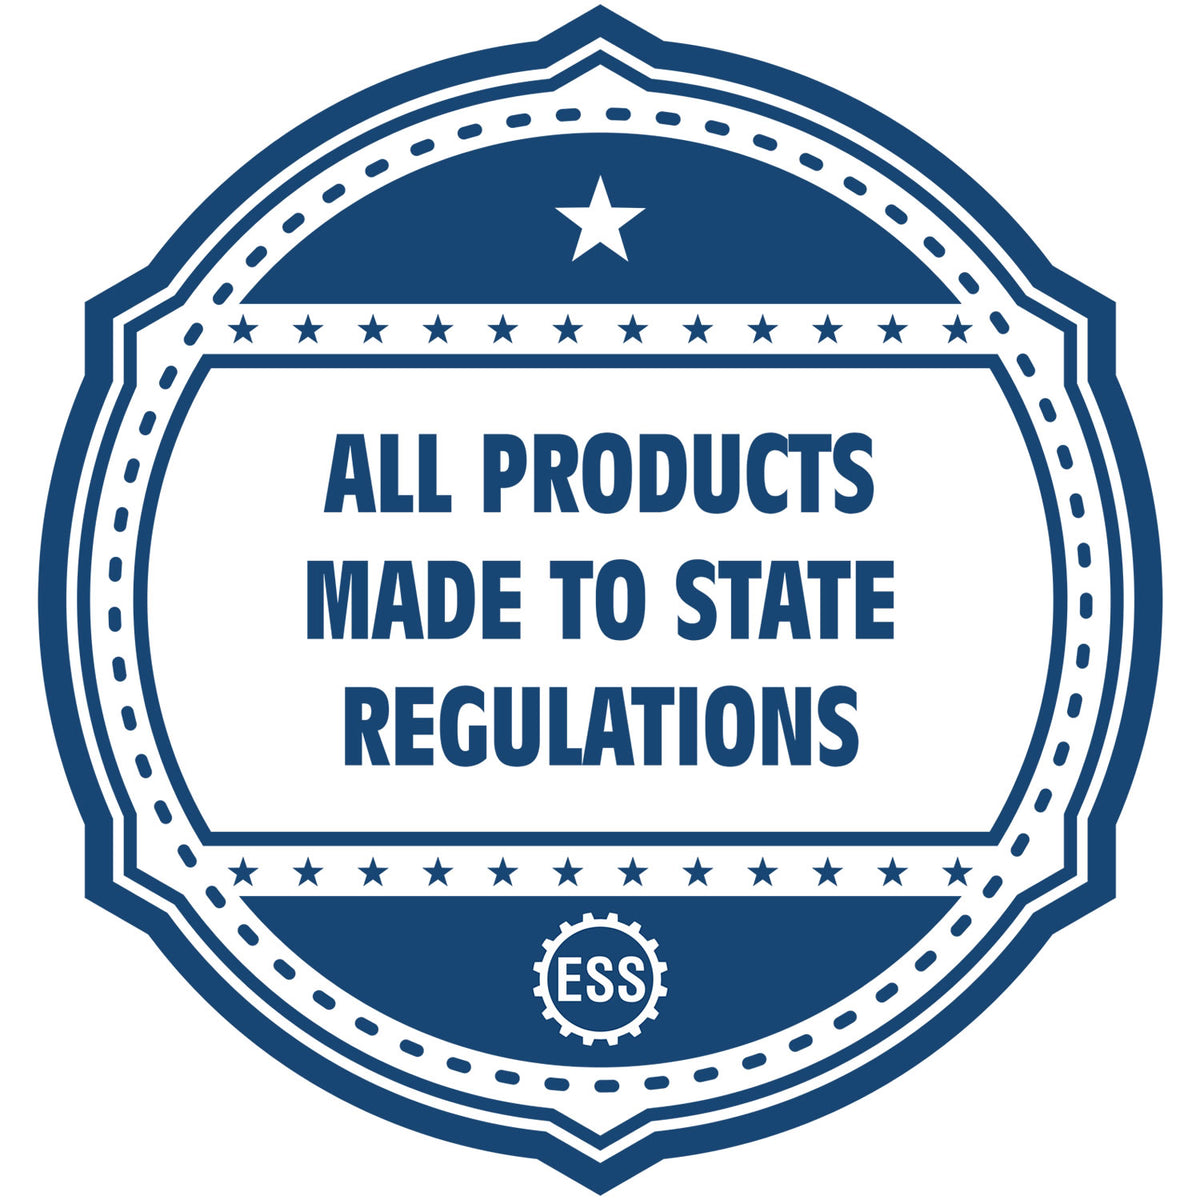 An icon or badge element for the Extended Long Reach Nevada Architect Seal Embosser showing that this product is made in compliance with state regulations.